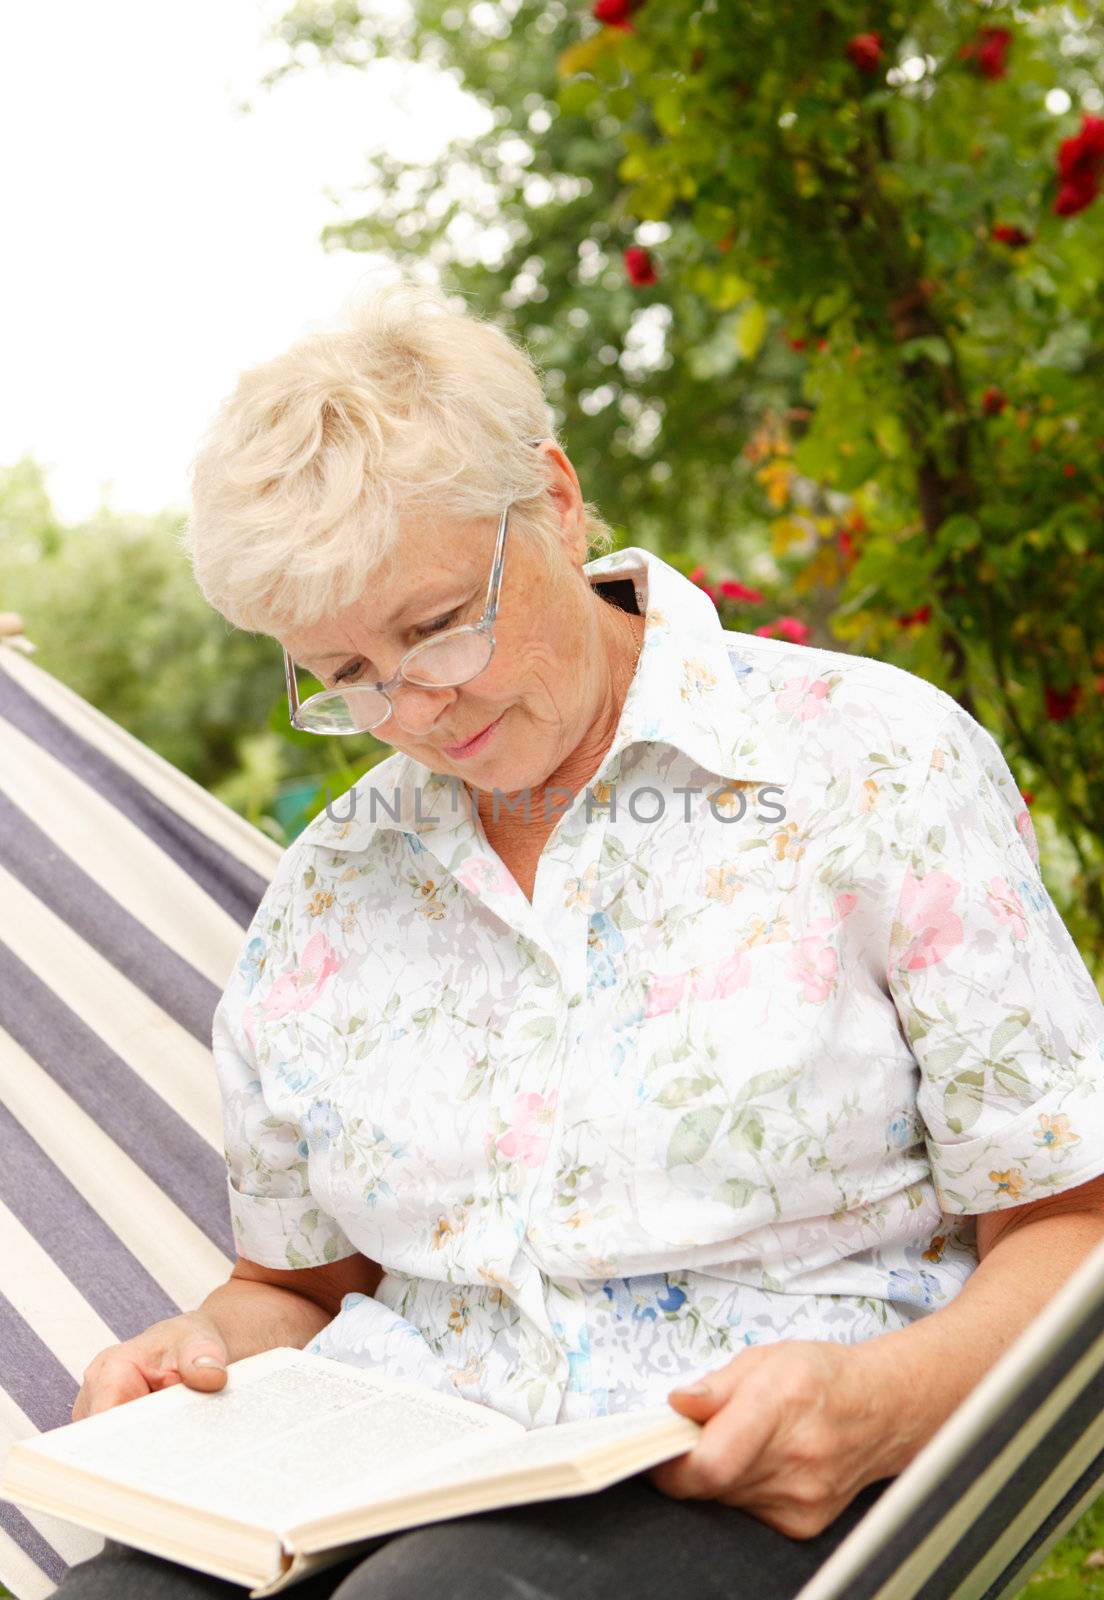 The elderly woman reads the book in a garden